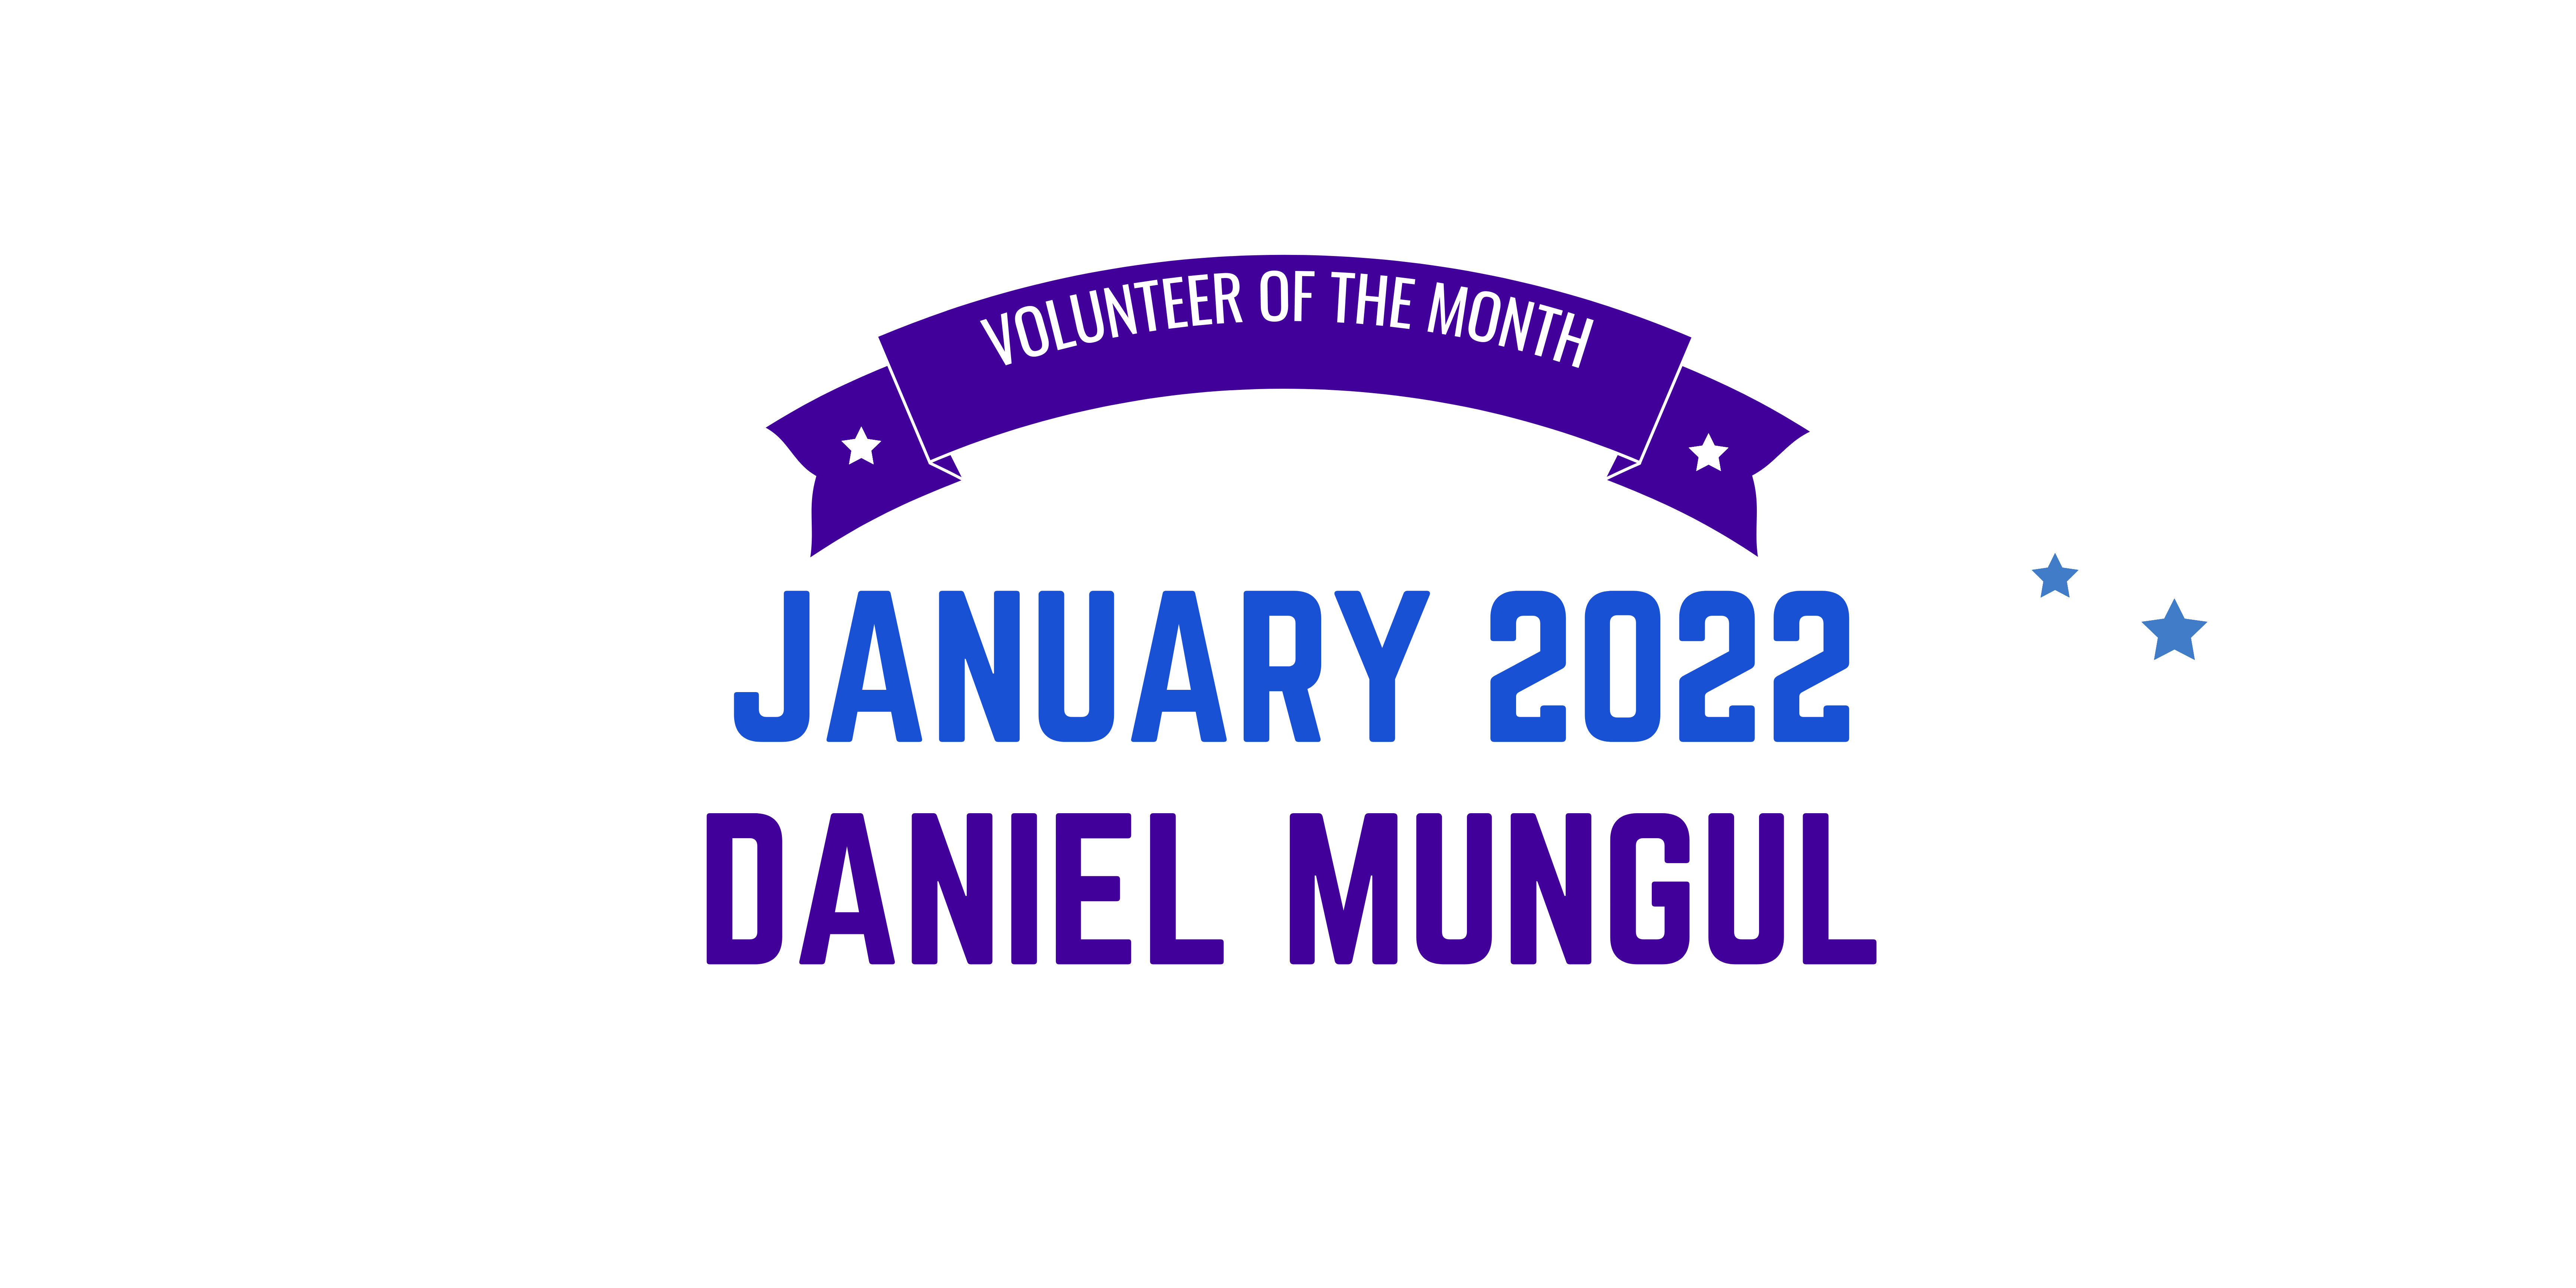 January 2022 Volunteer of the Month